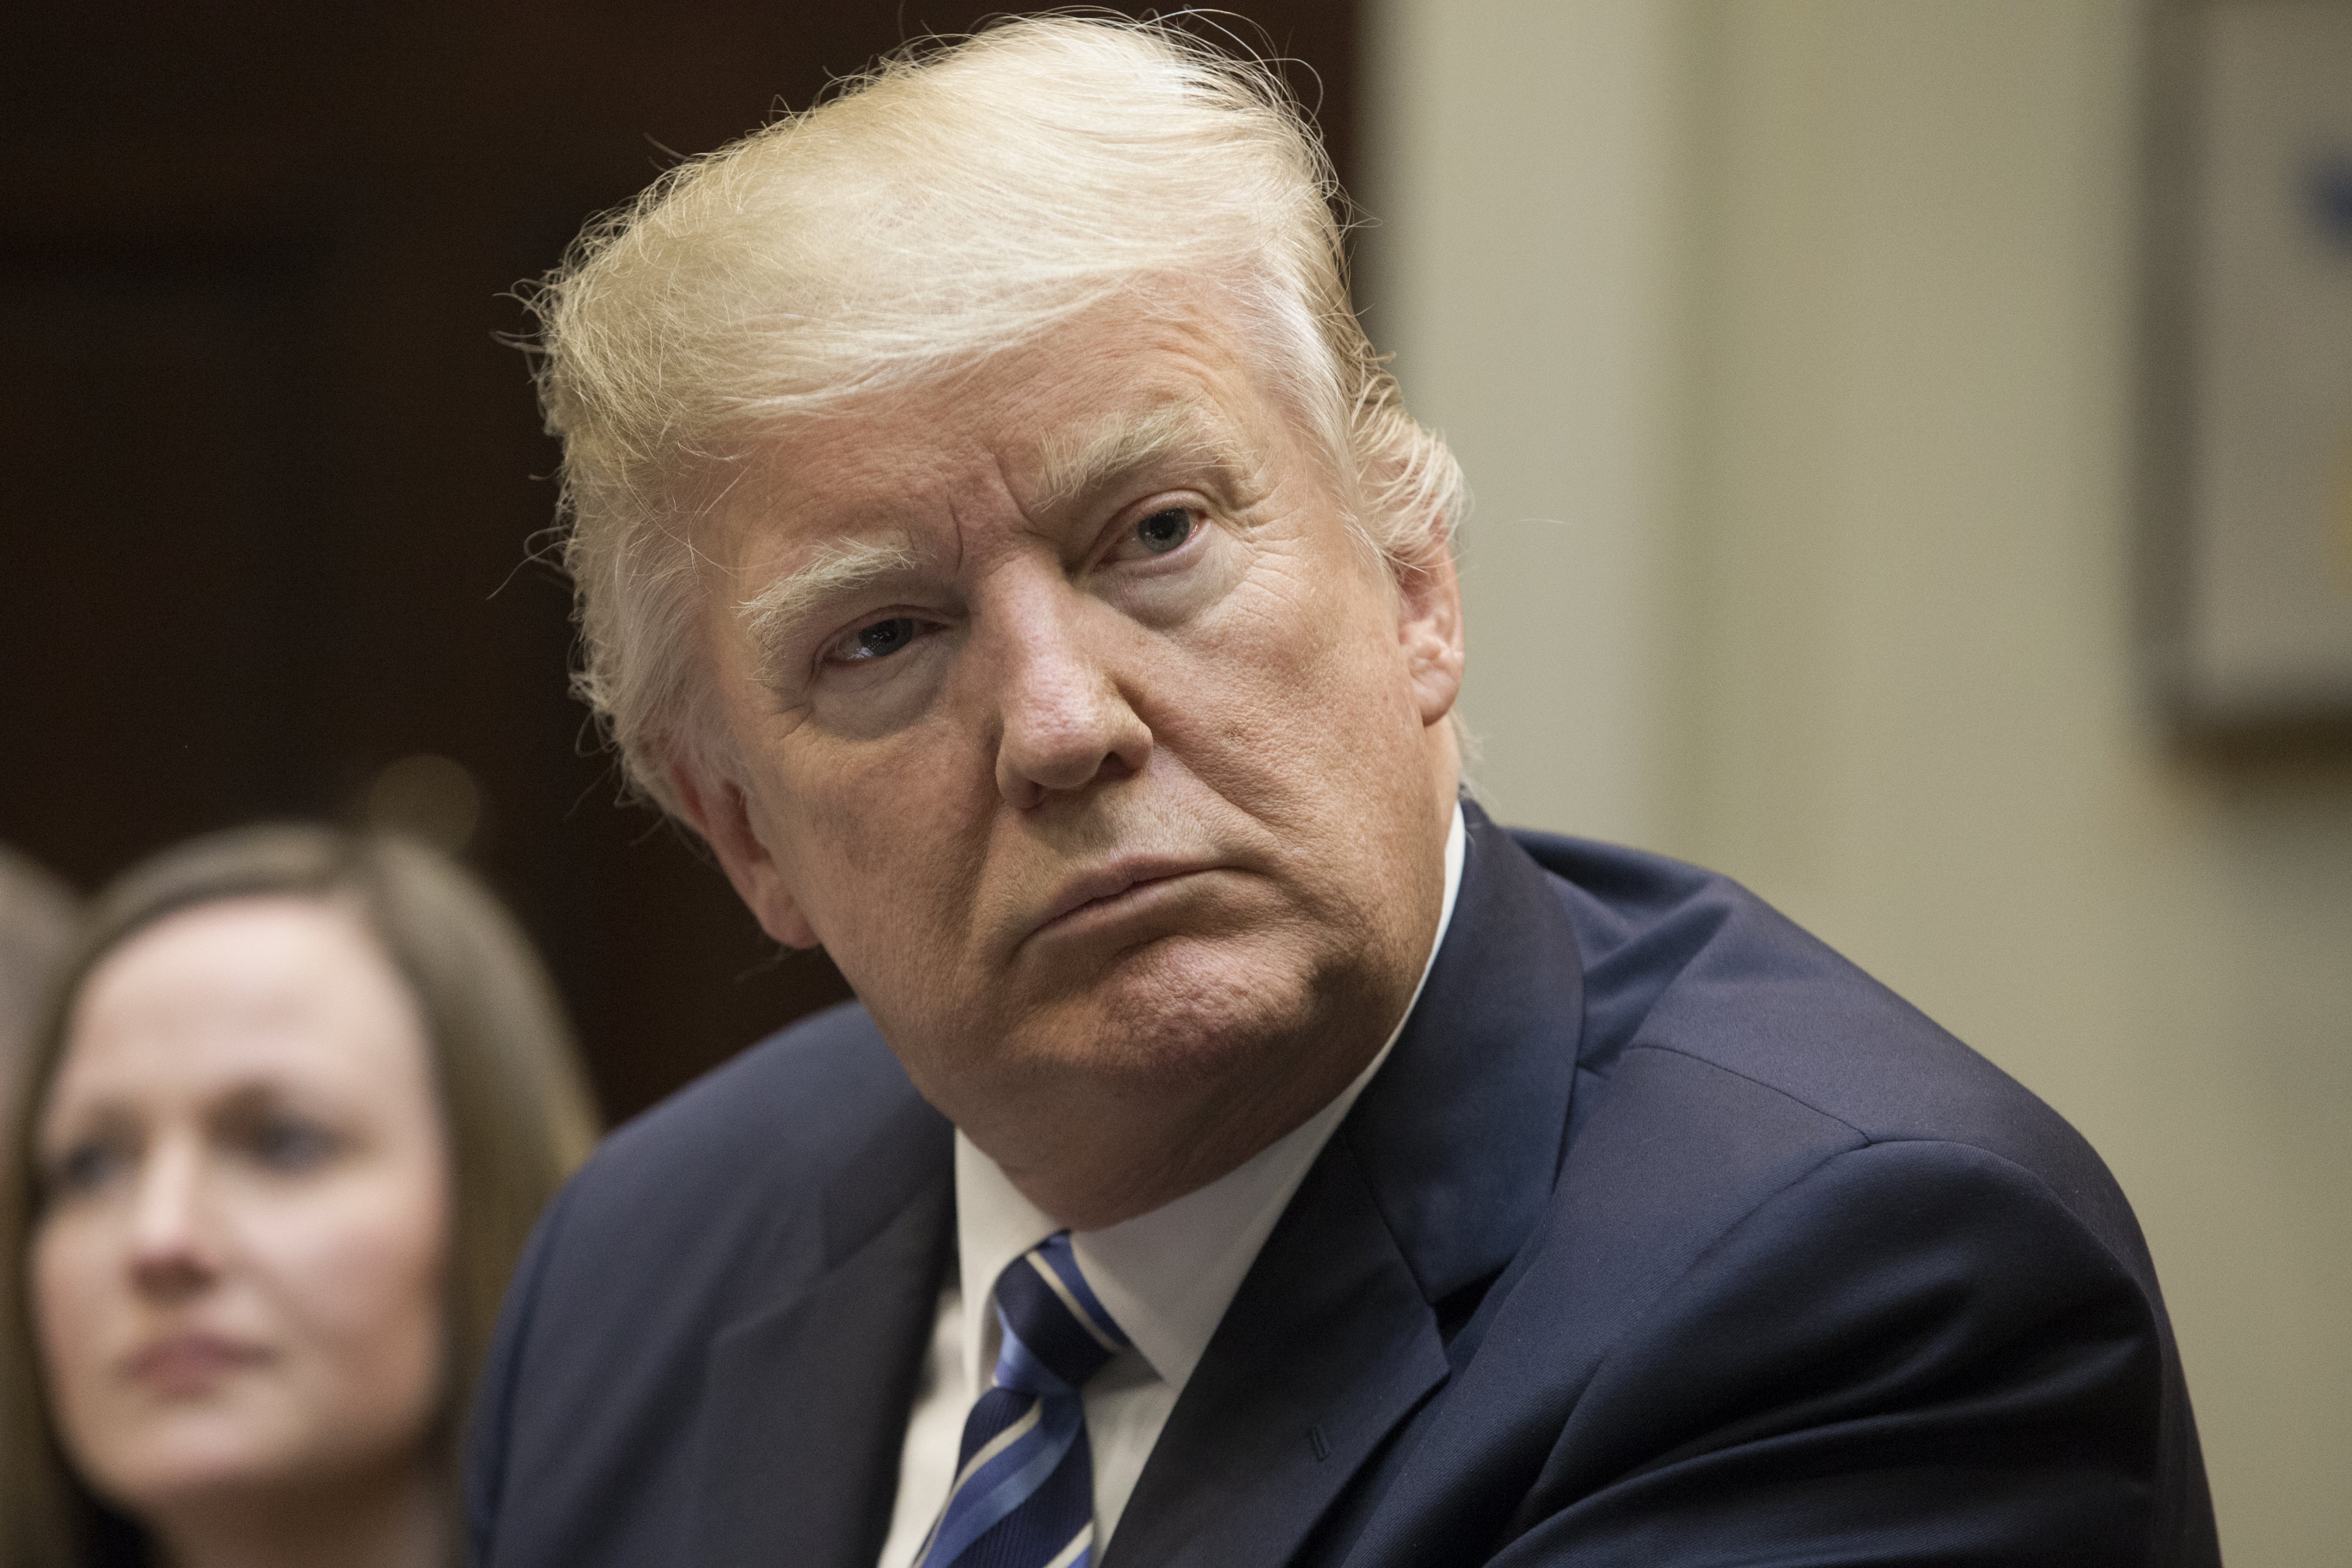 U.S. President Donald Trump listens during a meeting on health care in the Roosevelt Room of the White House in Washington, D.C., U.S., on Monday, March 13, 2017. Senate Democrats warned Republicans Monday that attempts to take funding away from Planned Parenthood or pay for Trump's border wall in a stopgap spending bill that must pass by late April would result in a government shutdown. Photographer: Michael Reynolds/Pool via Bloomberg (Bloomberg, Bloomberg via Getty Images)